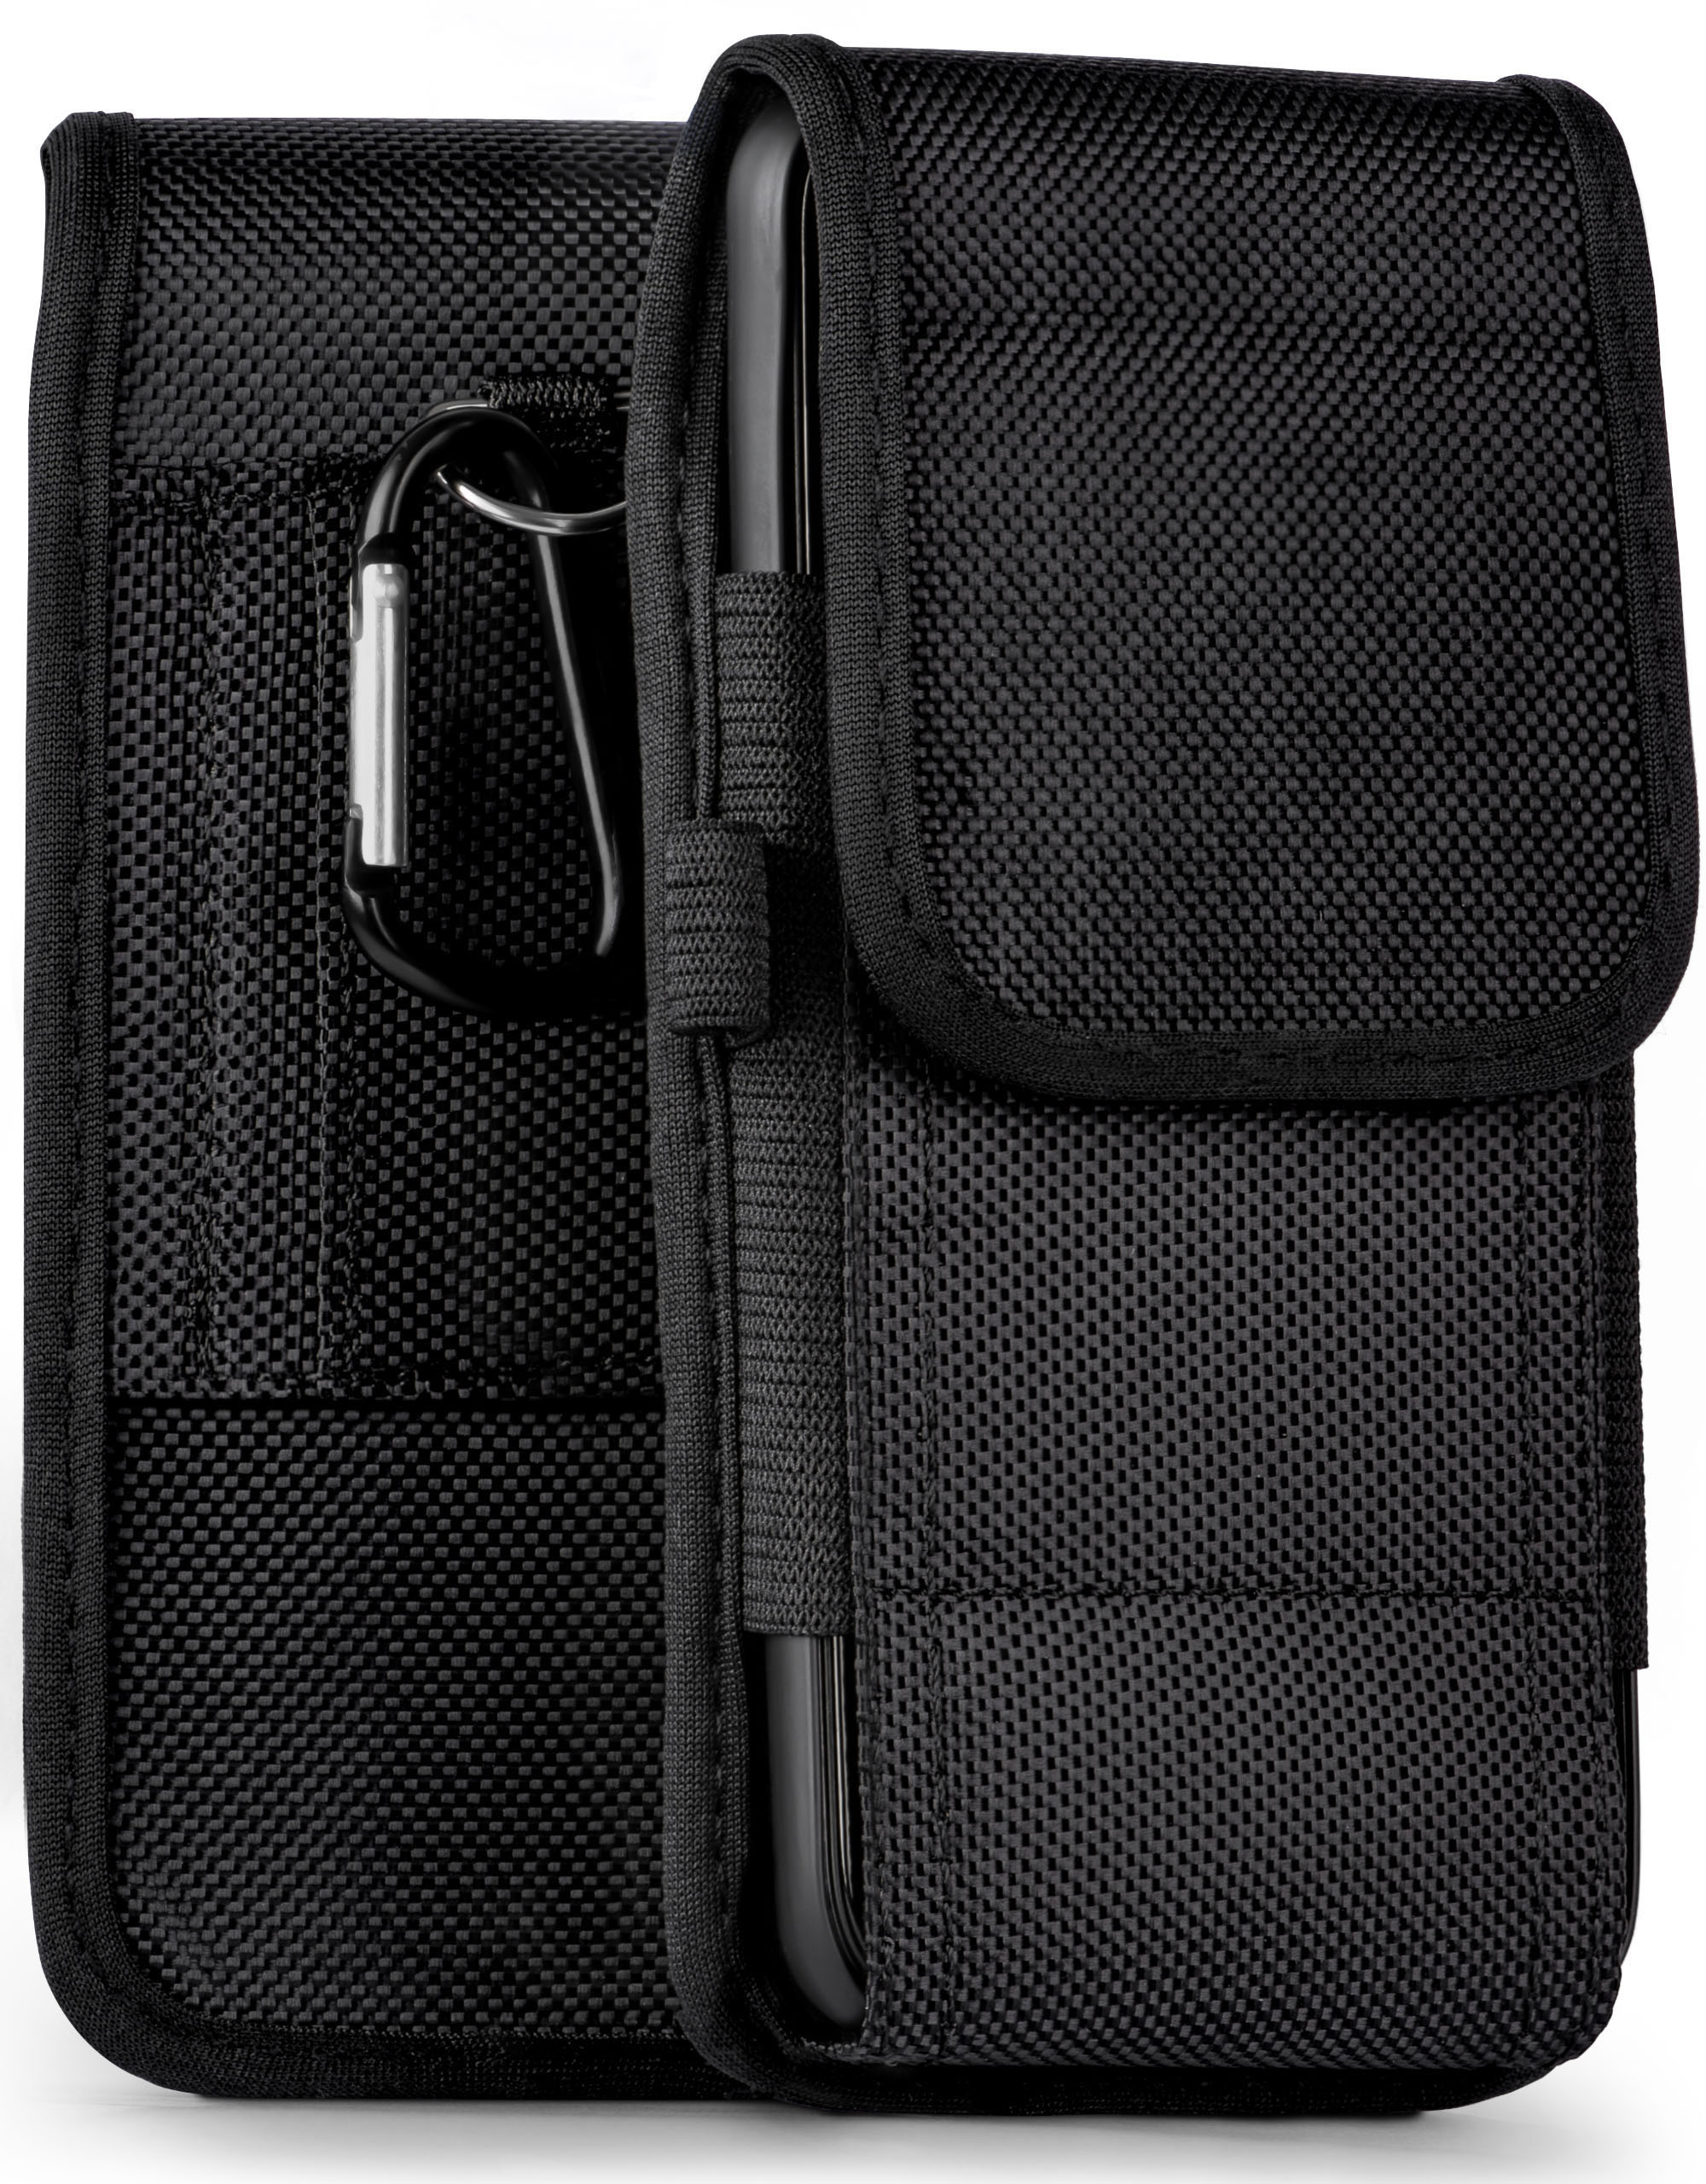 MOEX Trail Case, Holster, Agility GS110, Gigaset,